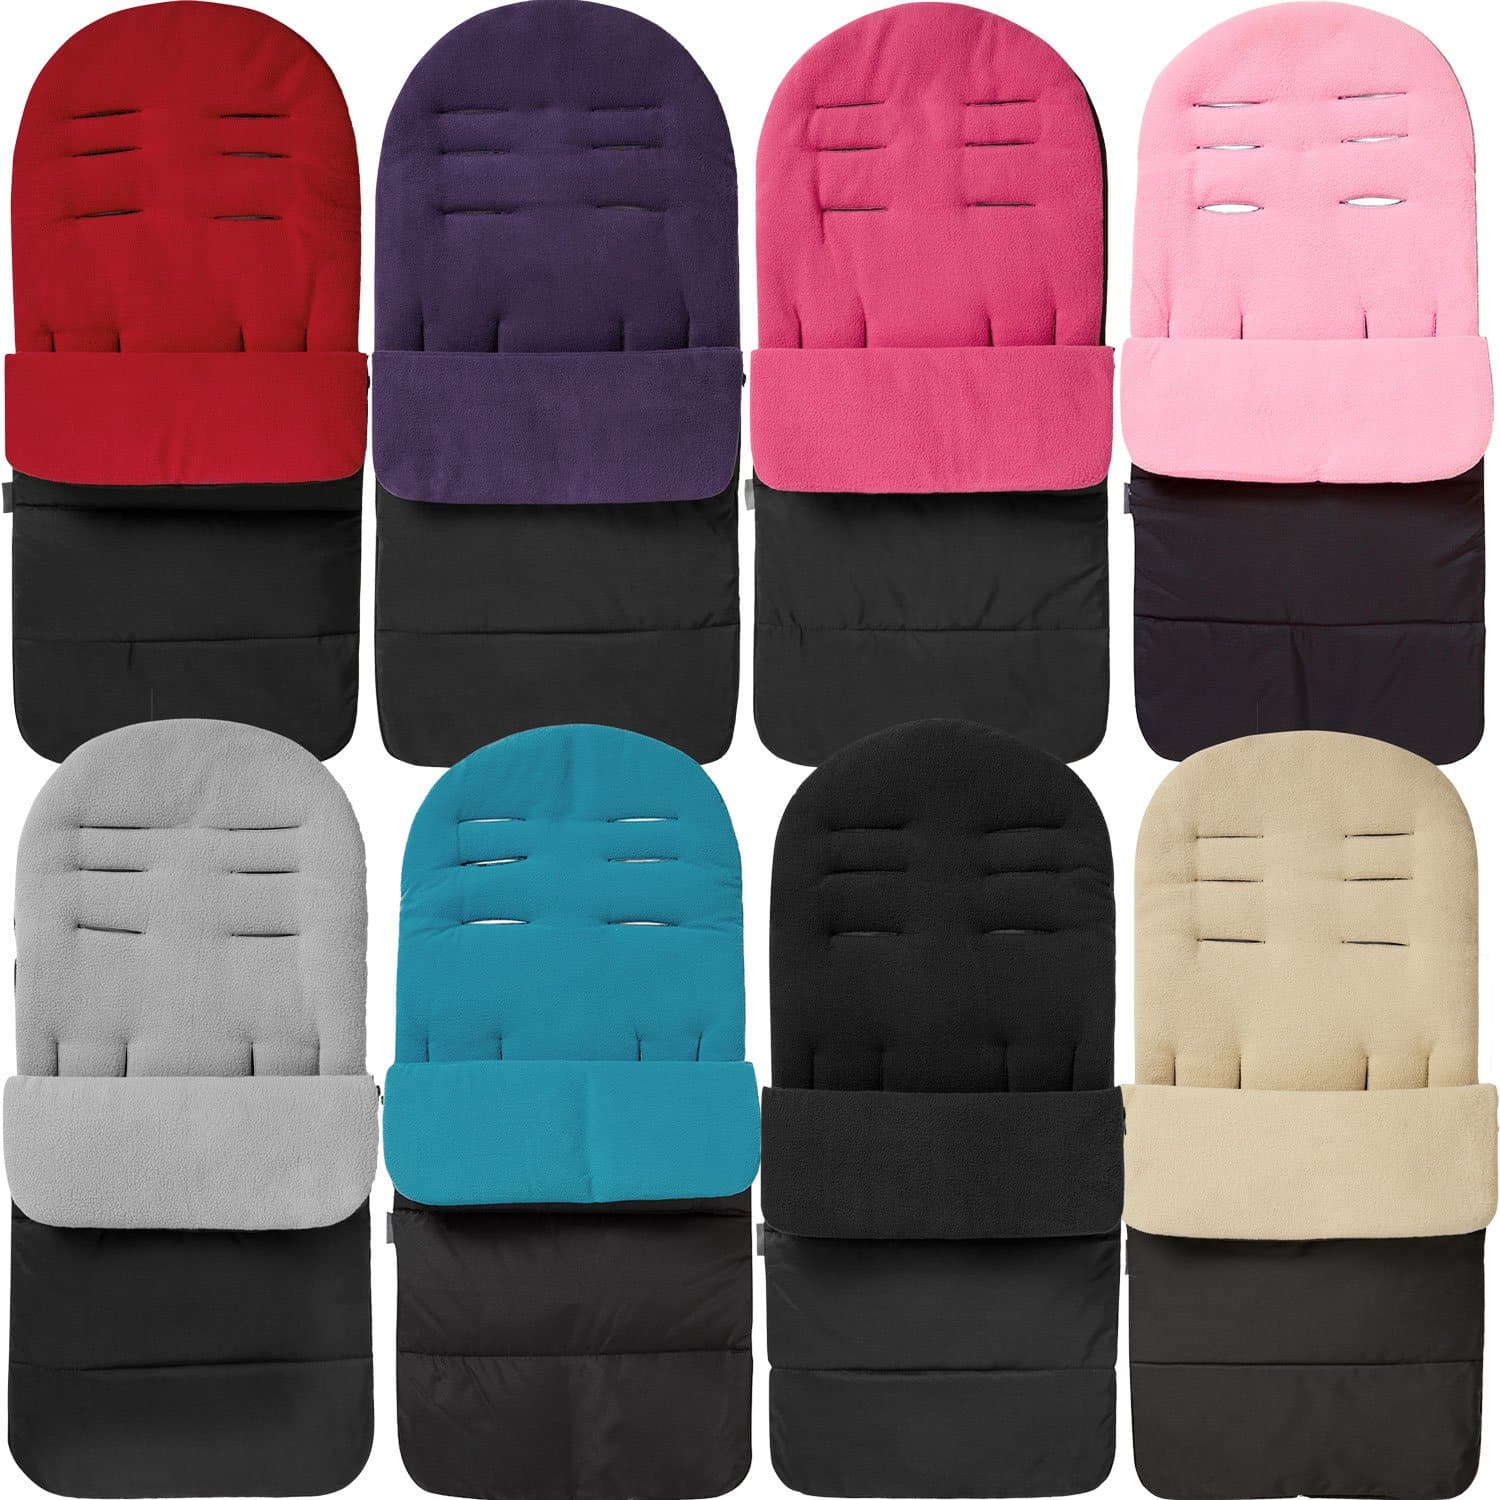 Universal Premium Pushchair Footmuff / Cosy Toes - Fits All Pushchairs / Prams And Buggies - For Your Little One